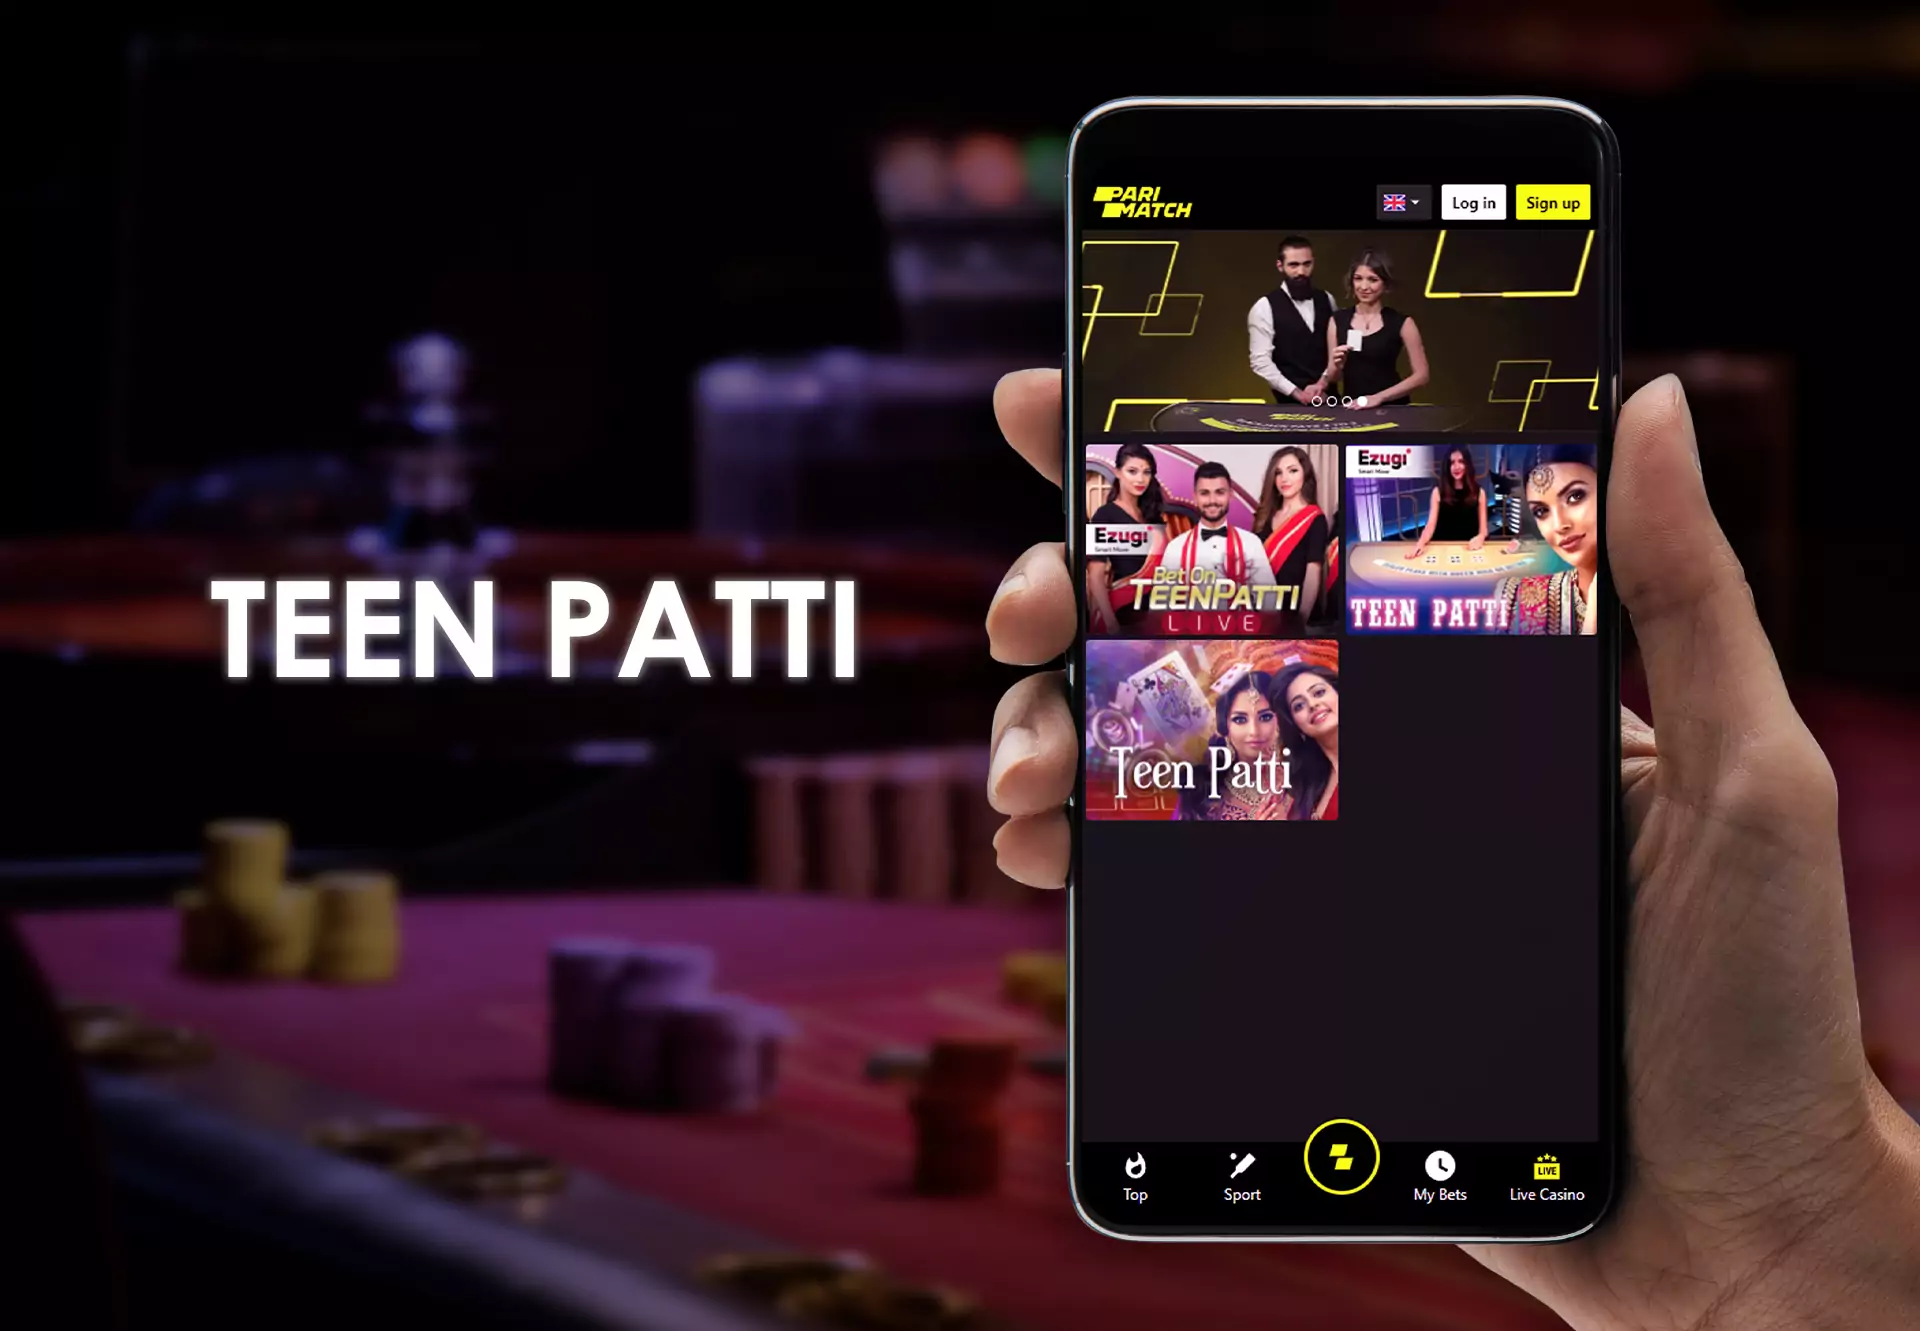 Teen Patti is similar to poker and has lots of fans among Indian users of the Parimatch app.